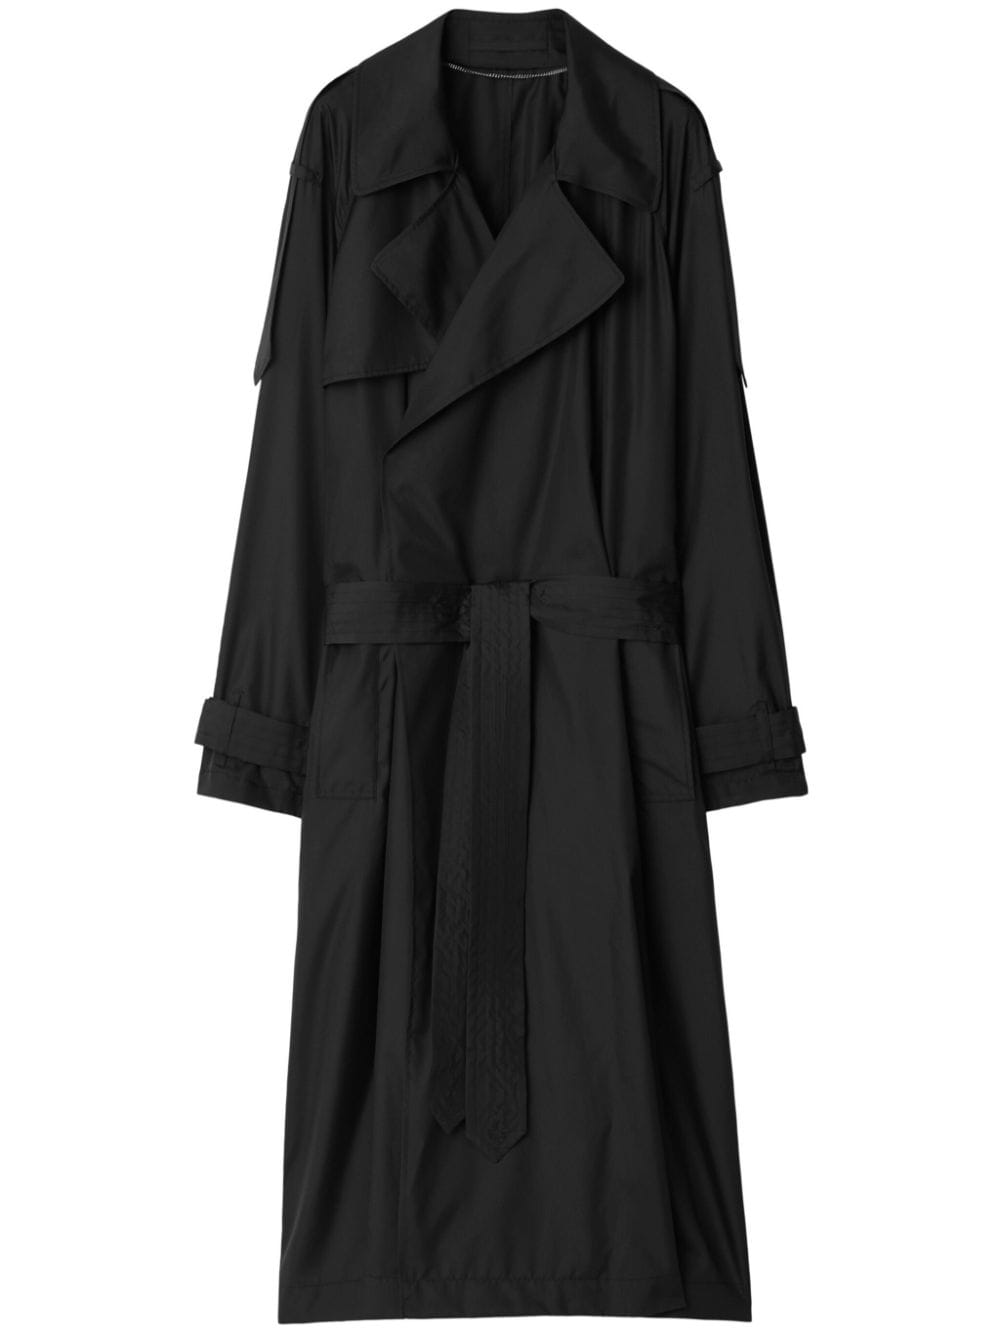 Burberry double-breasted silk trench coat - Black